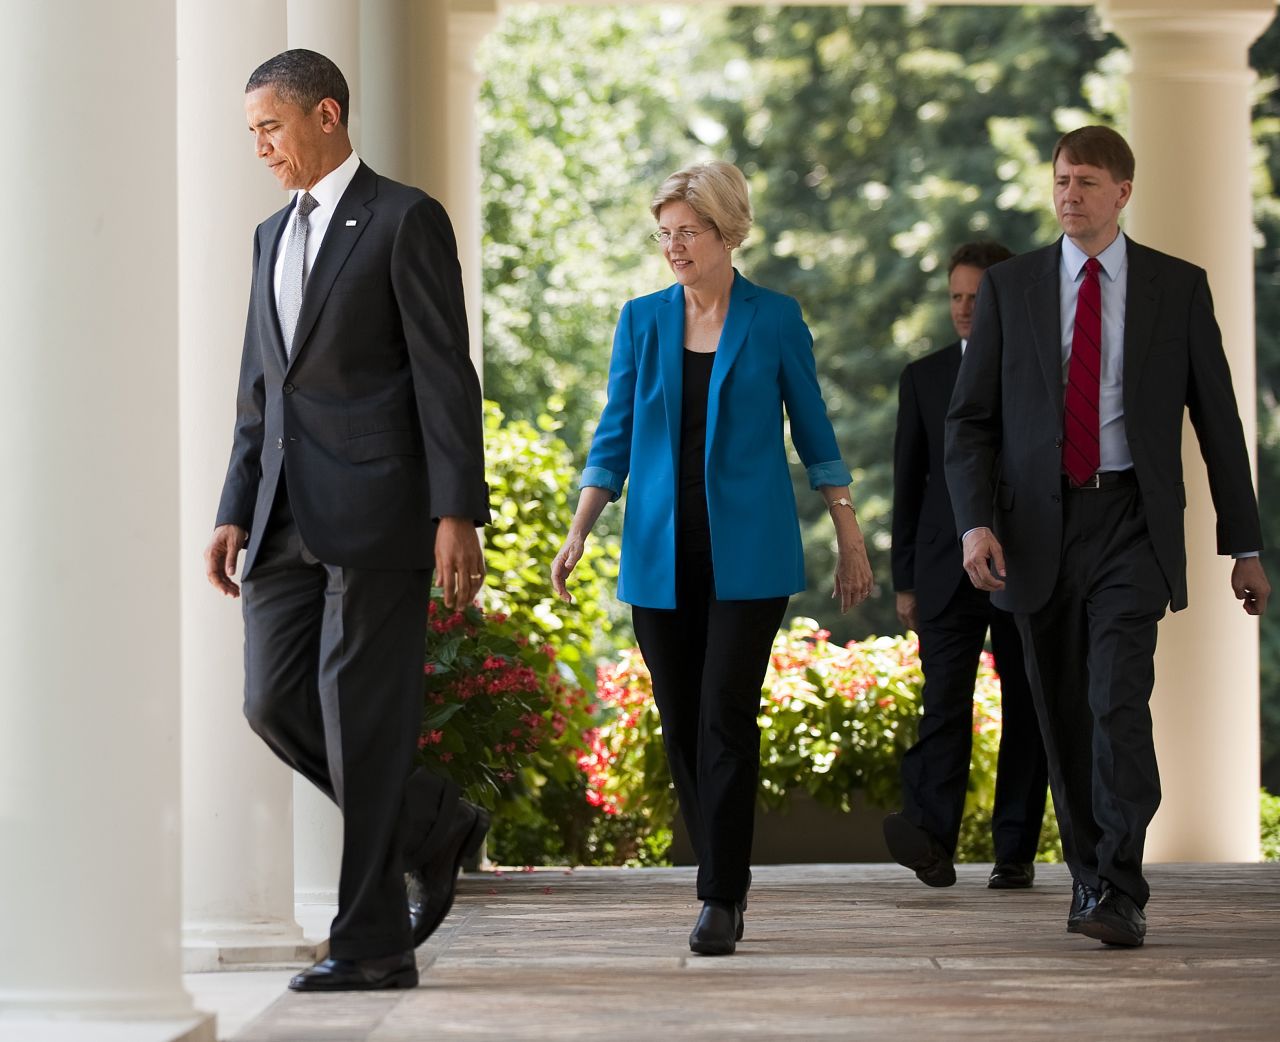 President Obama (left) and former financial adviser Elizabeth Warren (left) arrive at the nomination of former Ohio Attorney General Richard Cordray (right) to lead a consumer protection bureau at the White House on July 18, 2011.